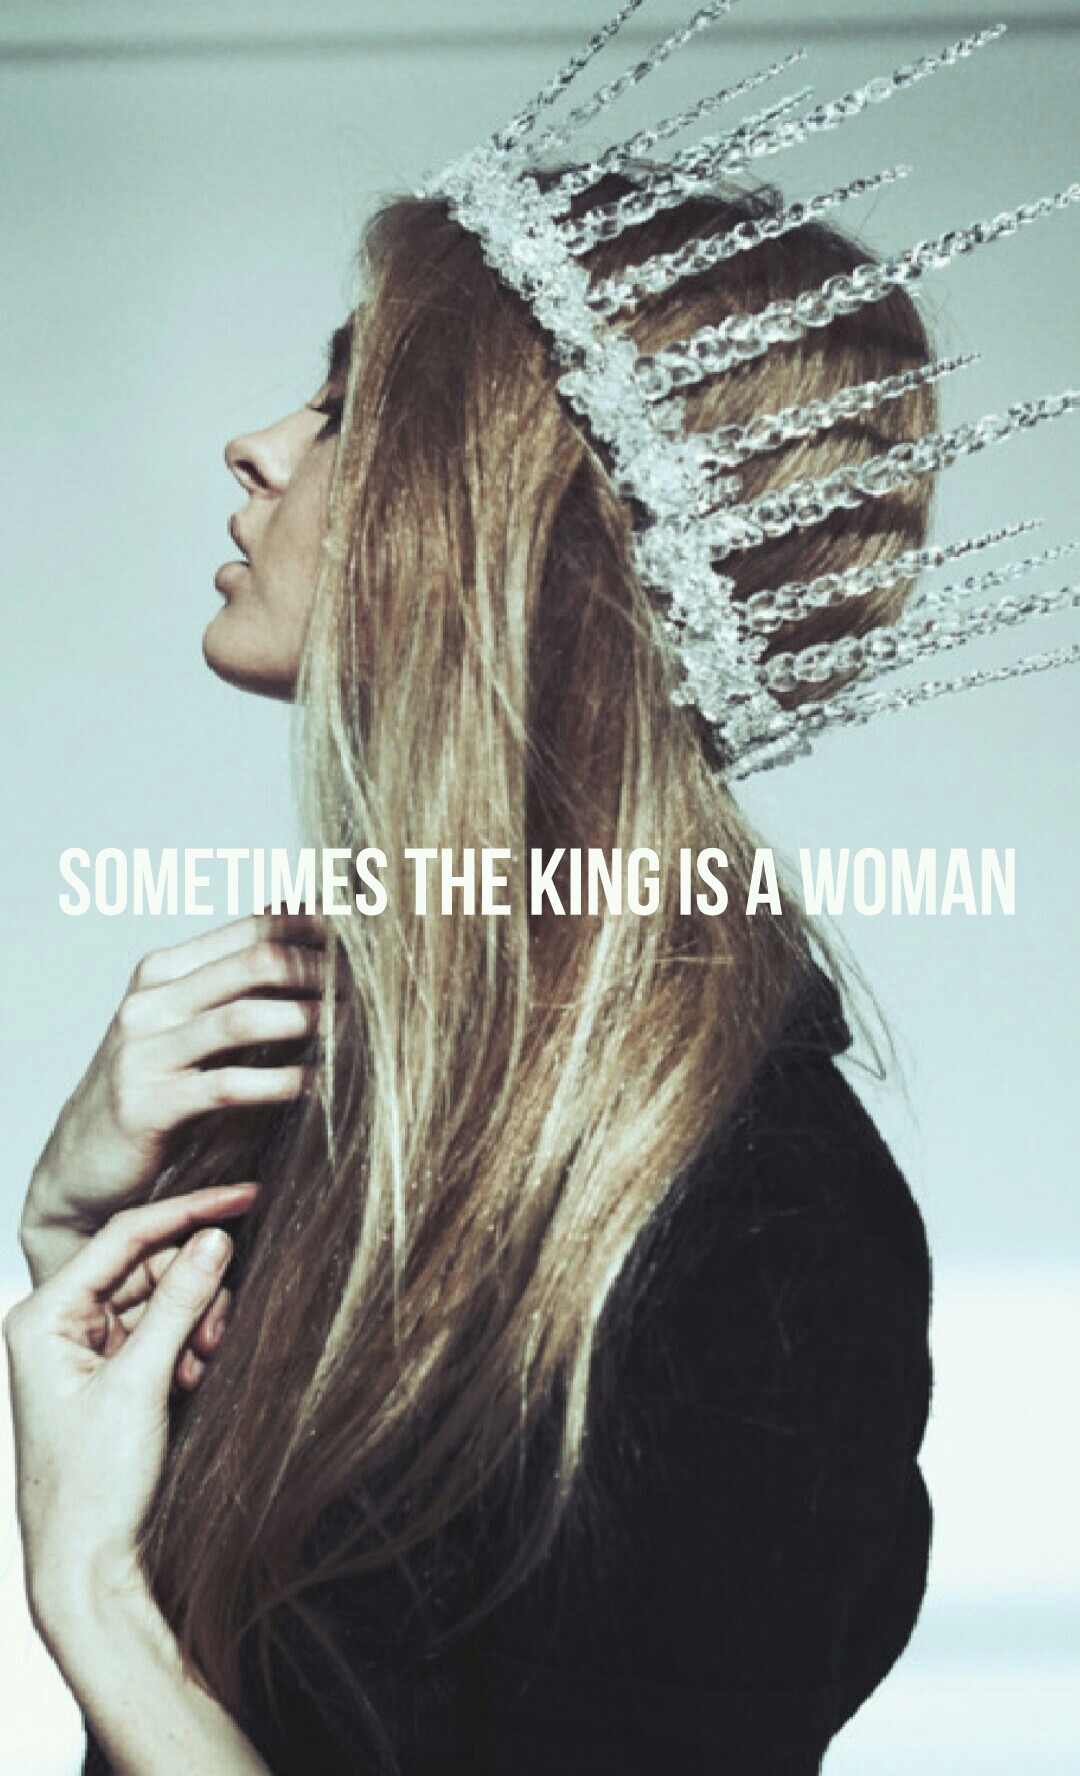 Sometimes the king is a woman